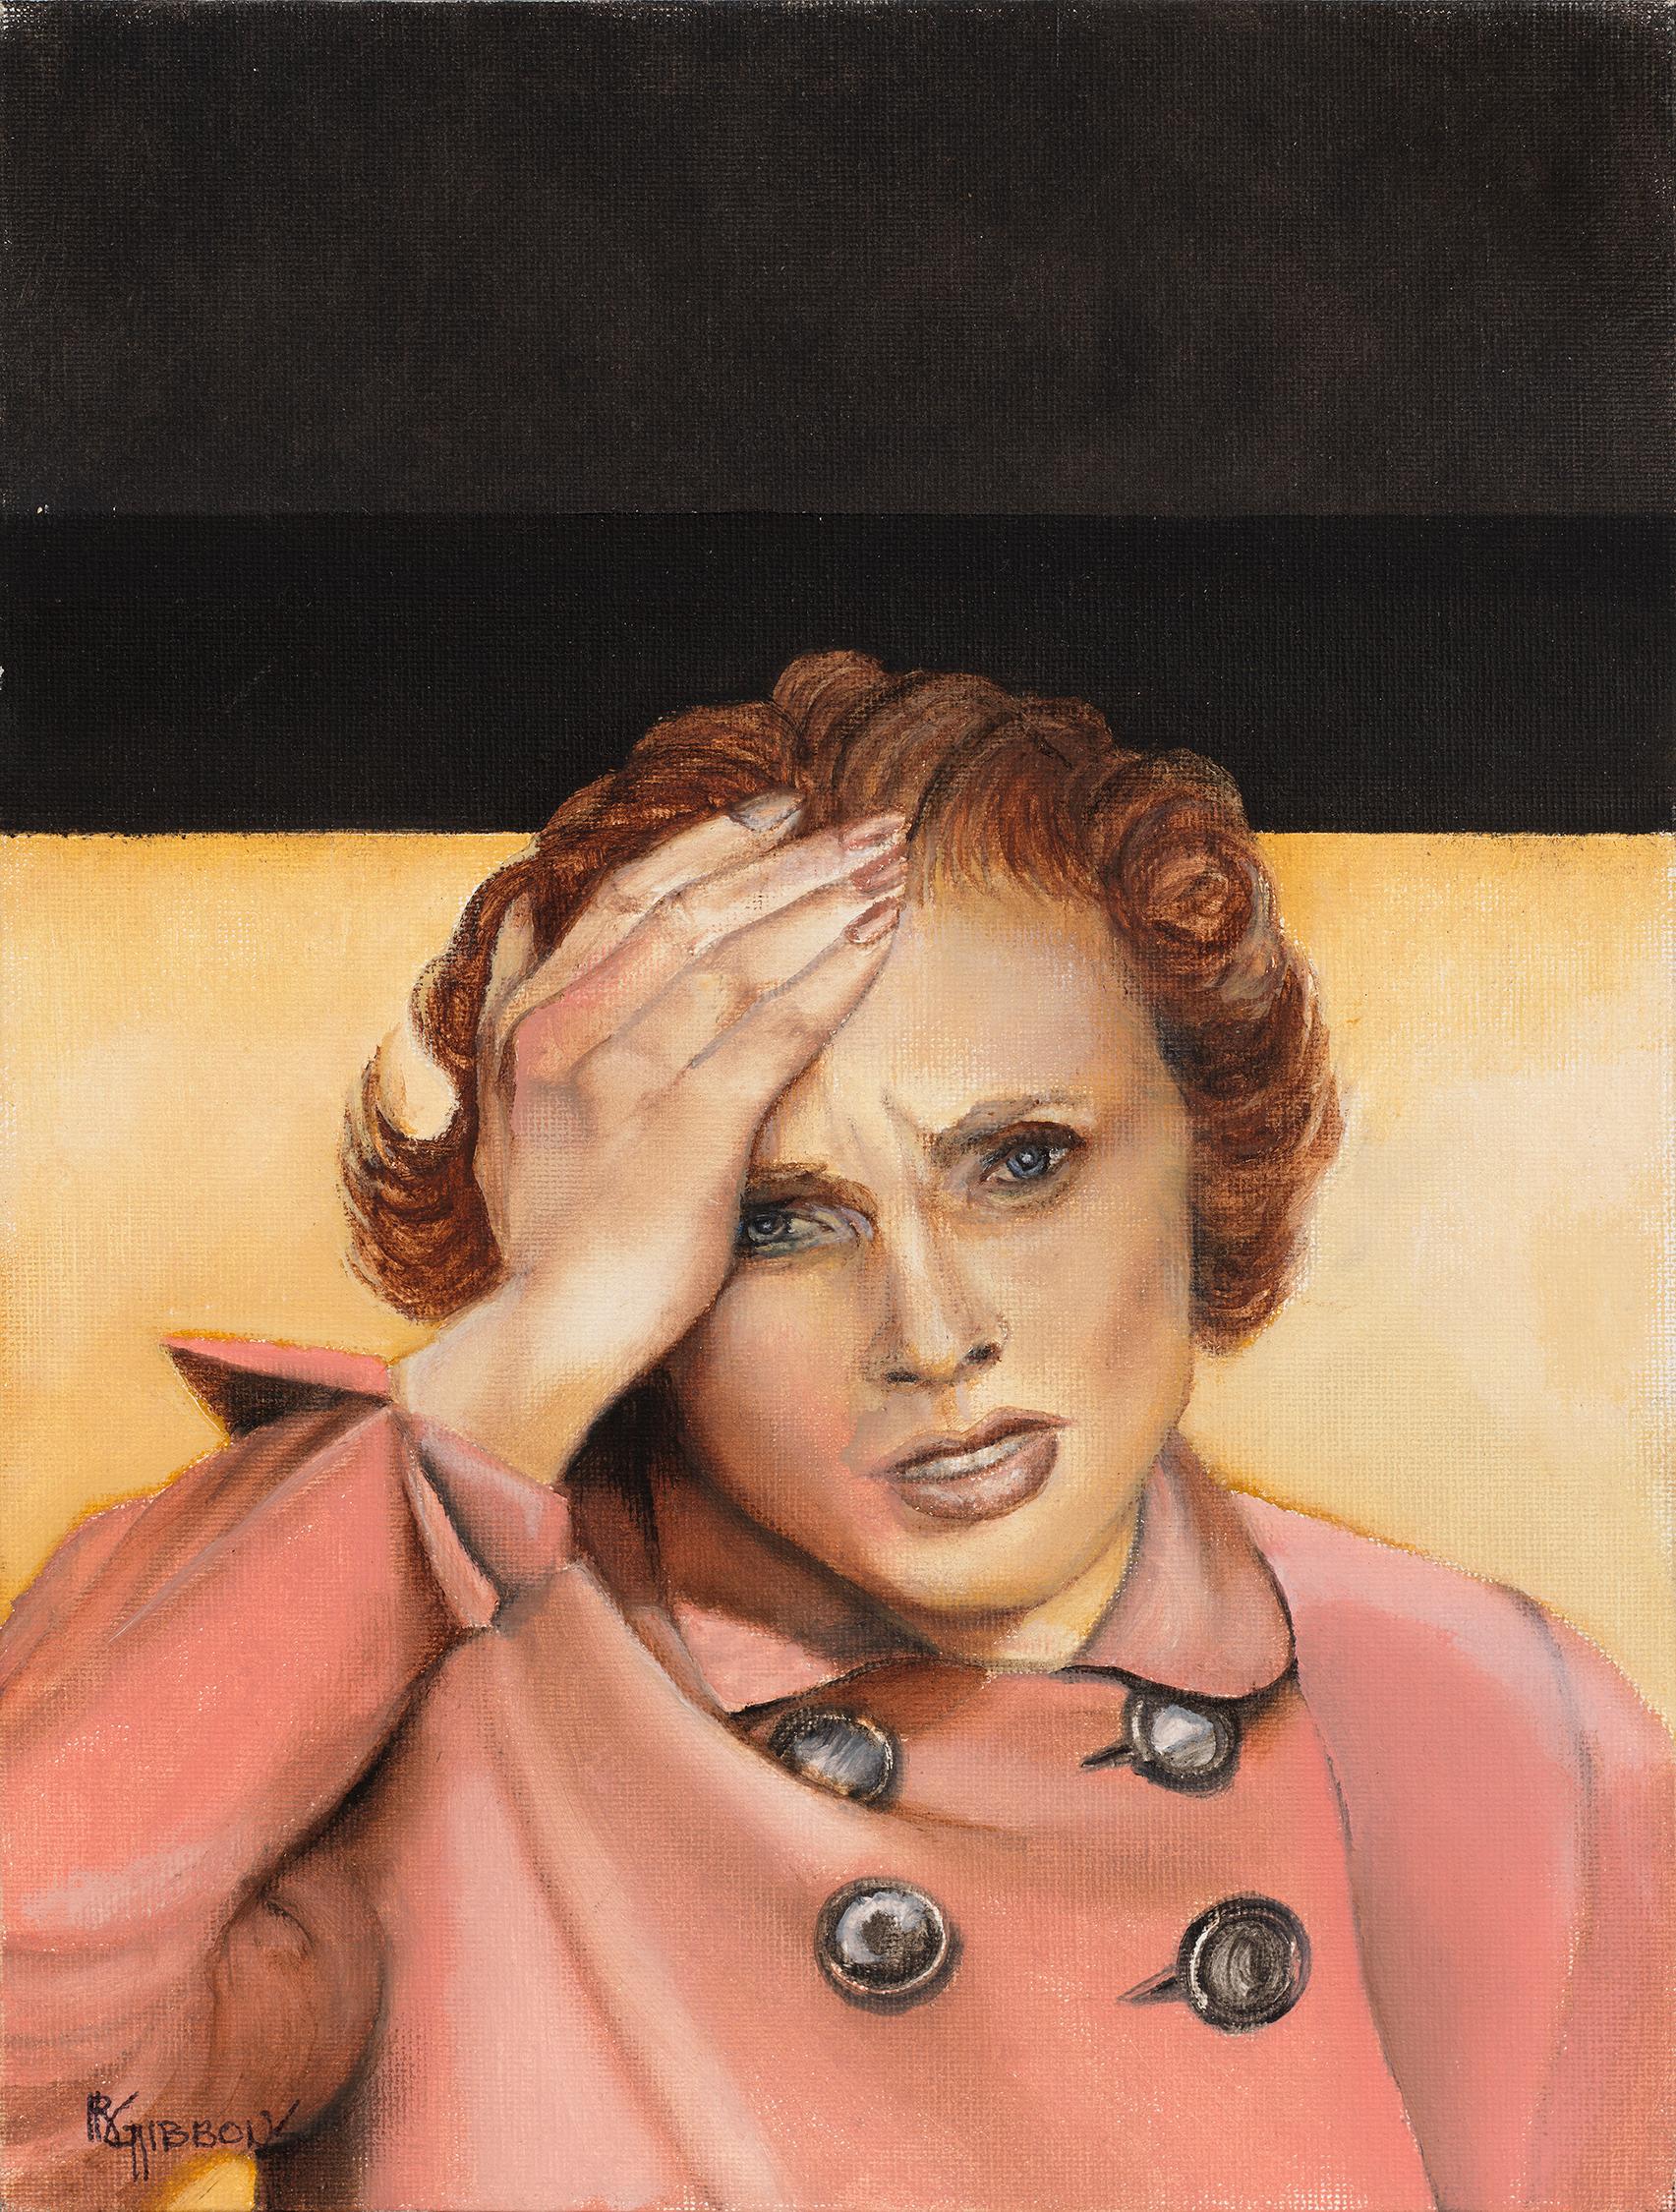 Richard Gibbons Figurative Painting - WAIT! - Portrait of a Woman, Hand on Head in Shock, Original Oil Painting